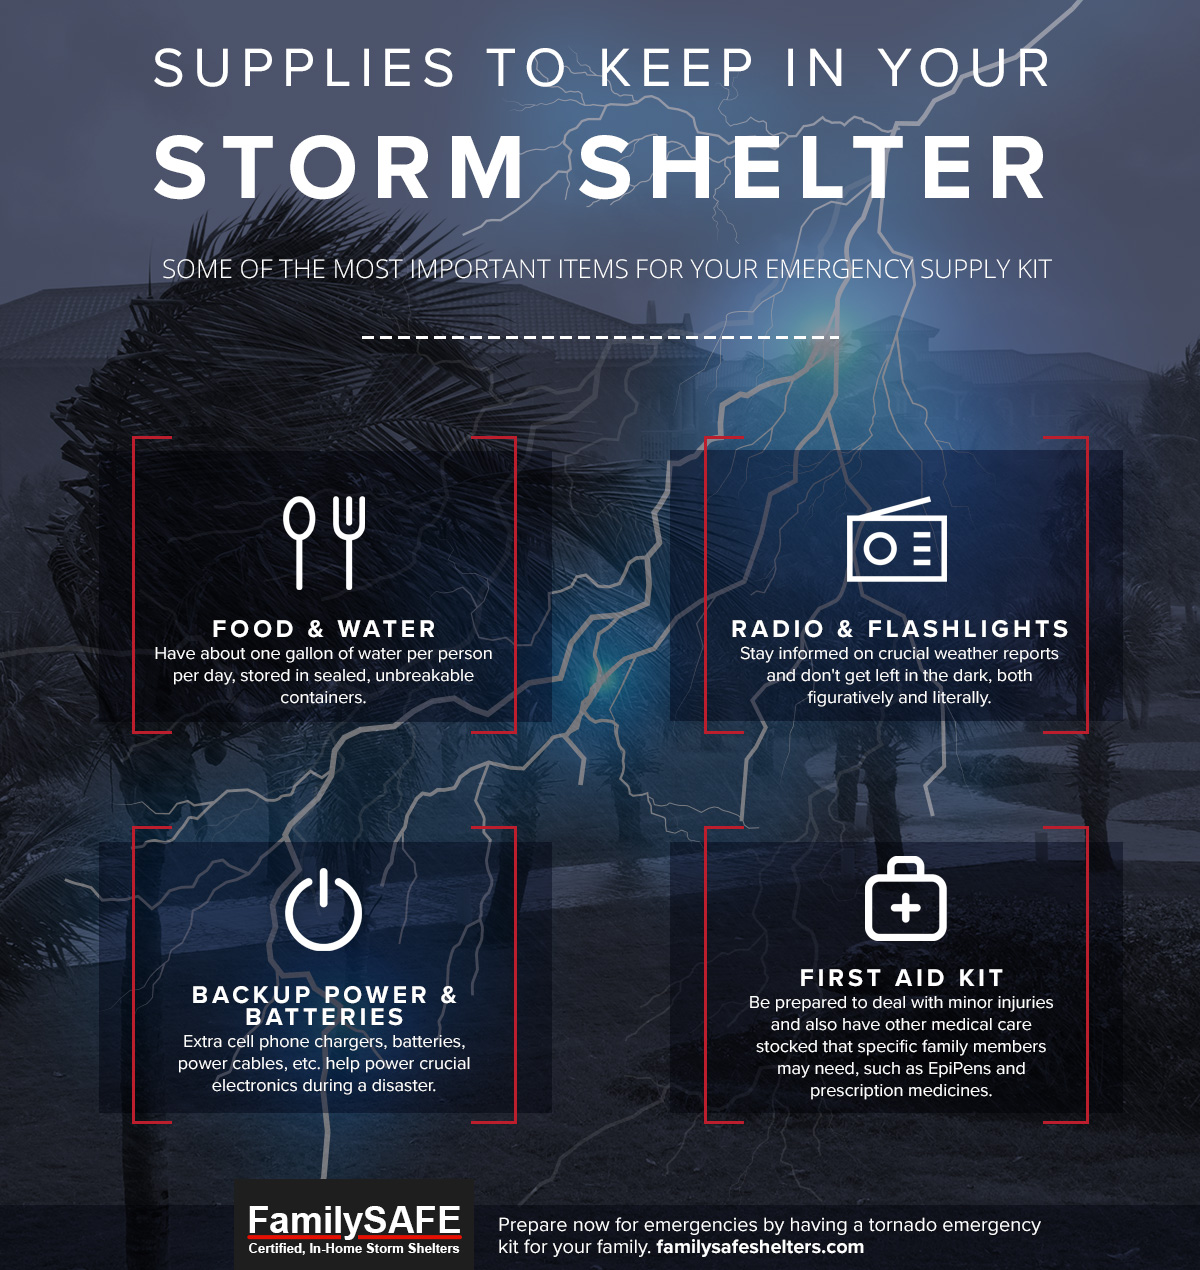 https://familysafeshelters.com/wp-content/uploads/2020/08/Supplies-to-Keep-in-Your-Storm-Shelter-5f3ed315b944a.jpg